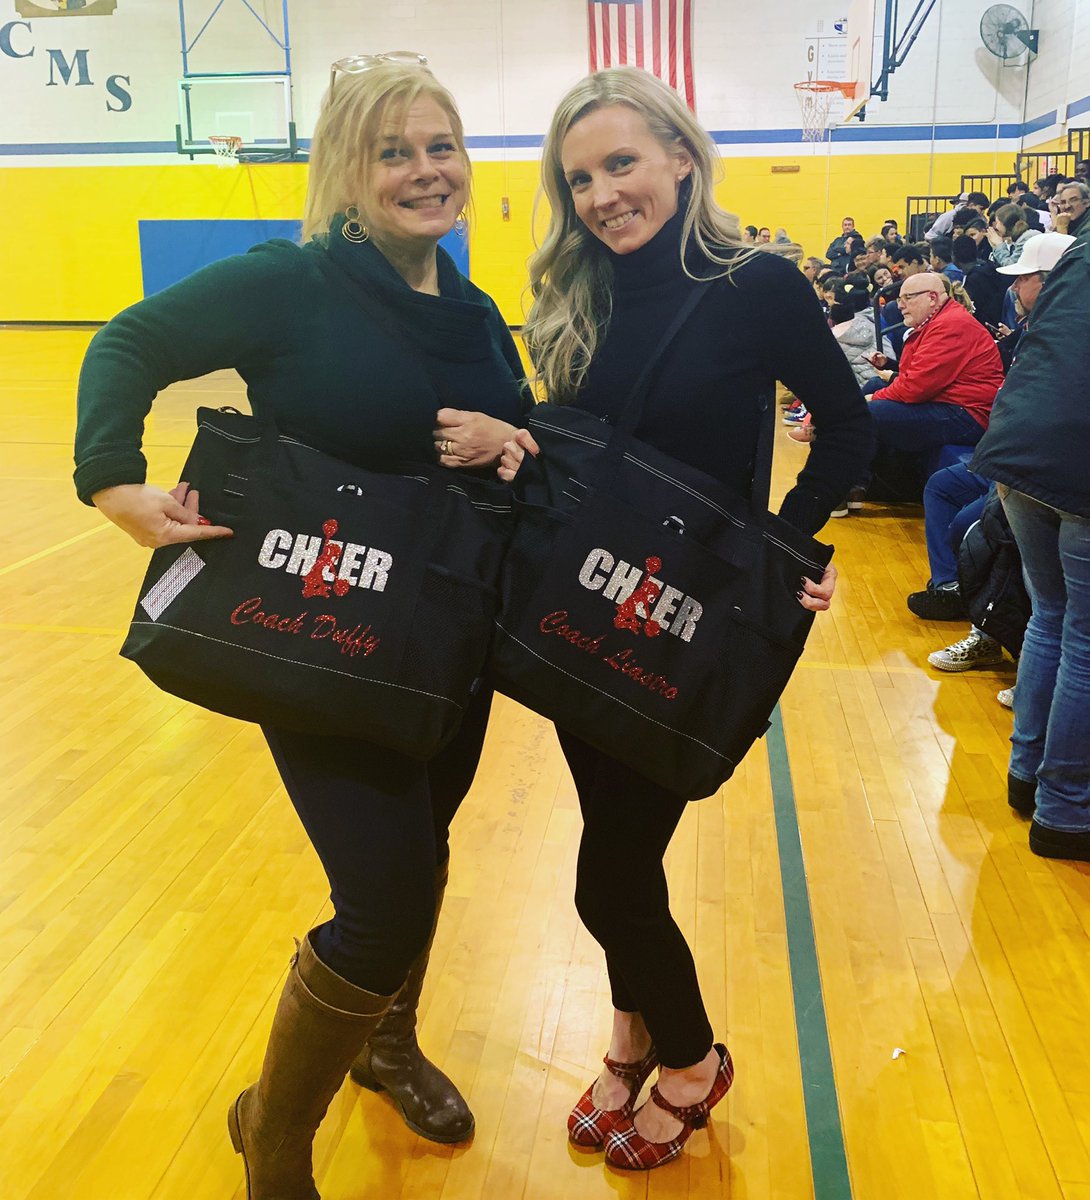 L❤️VE our new cheer bags! So lucky to have such an awesome group of cheerleaders this year and SO PROUD to be your coach! ❤️🖤📣 #WMScheer @MrsDuffyWMS